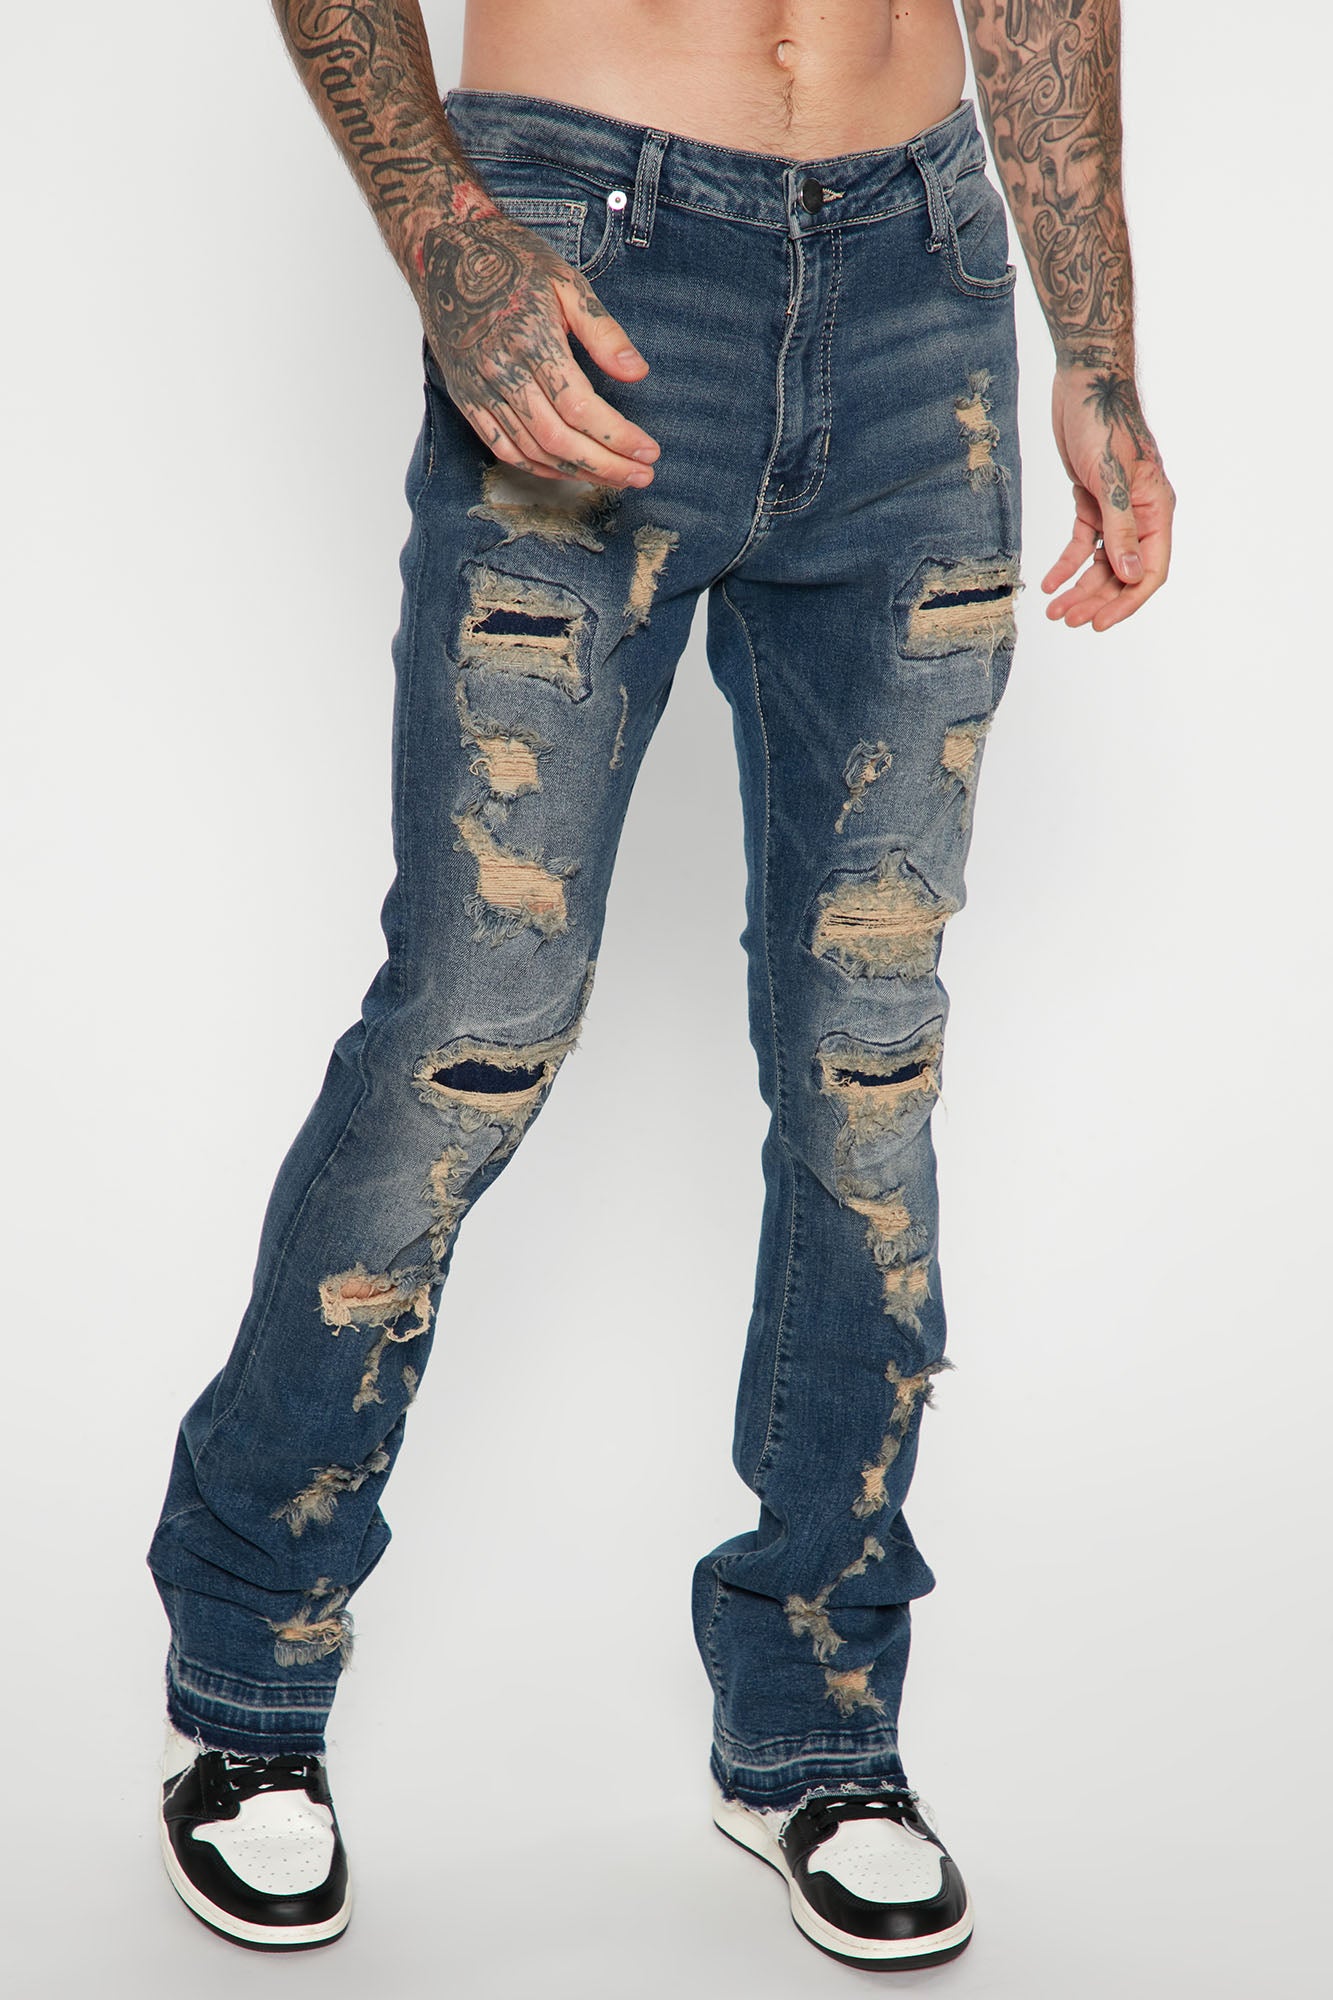 Back Me Up Ripped Stacked Skinny Flared Jeans - Vintage Blue Wash